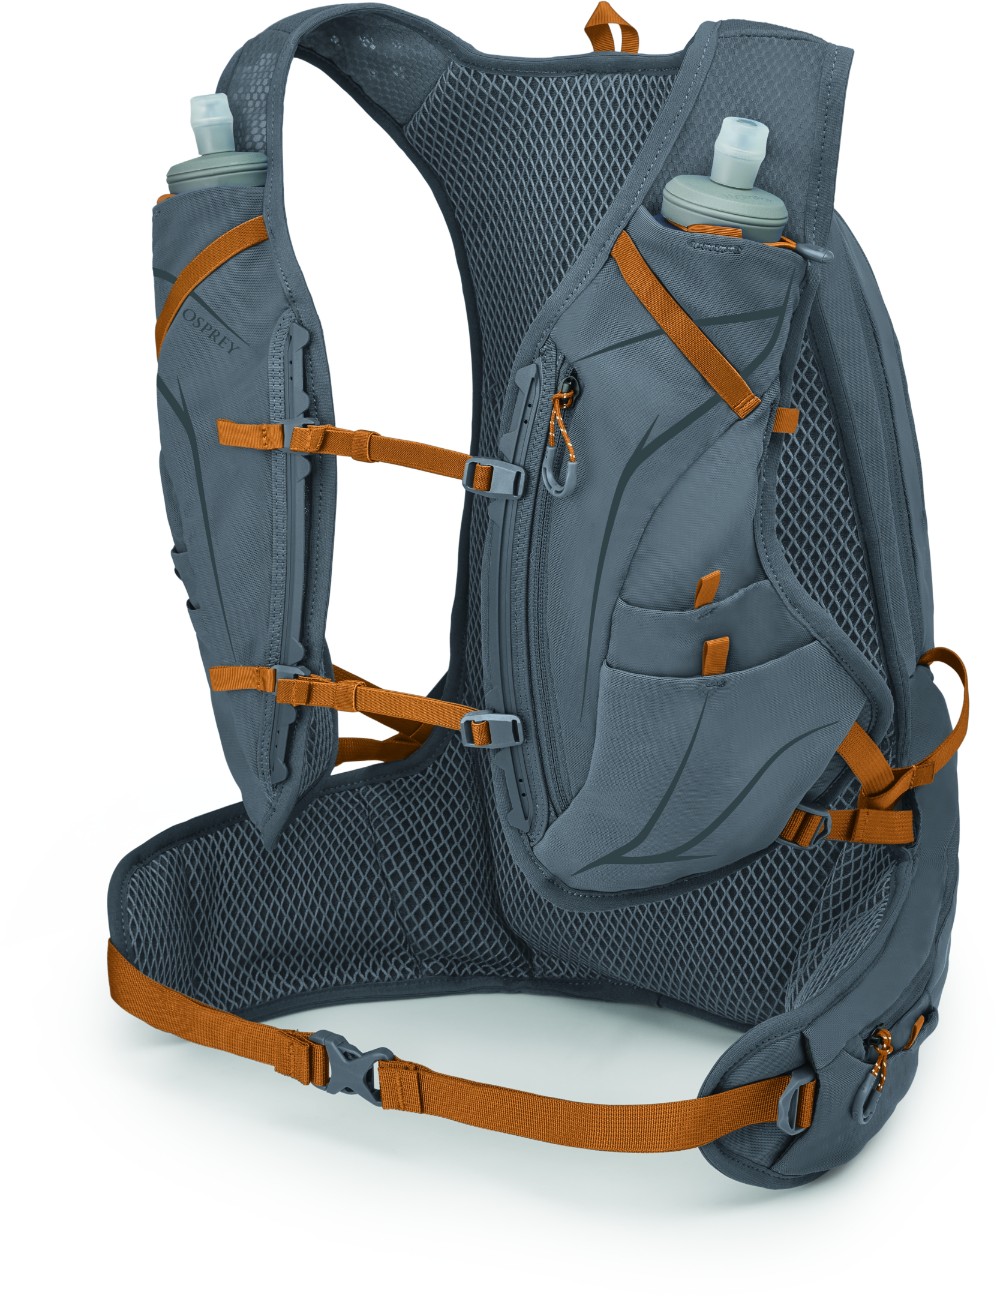 Duro 15 Hydration Pack with Flasks image 0